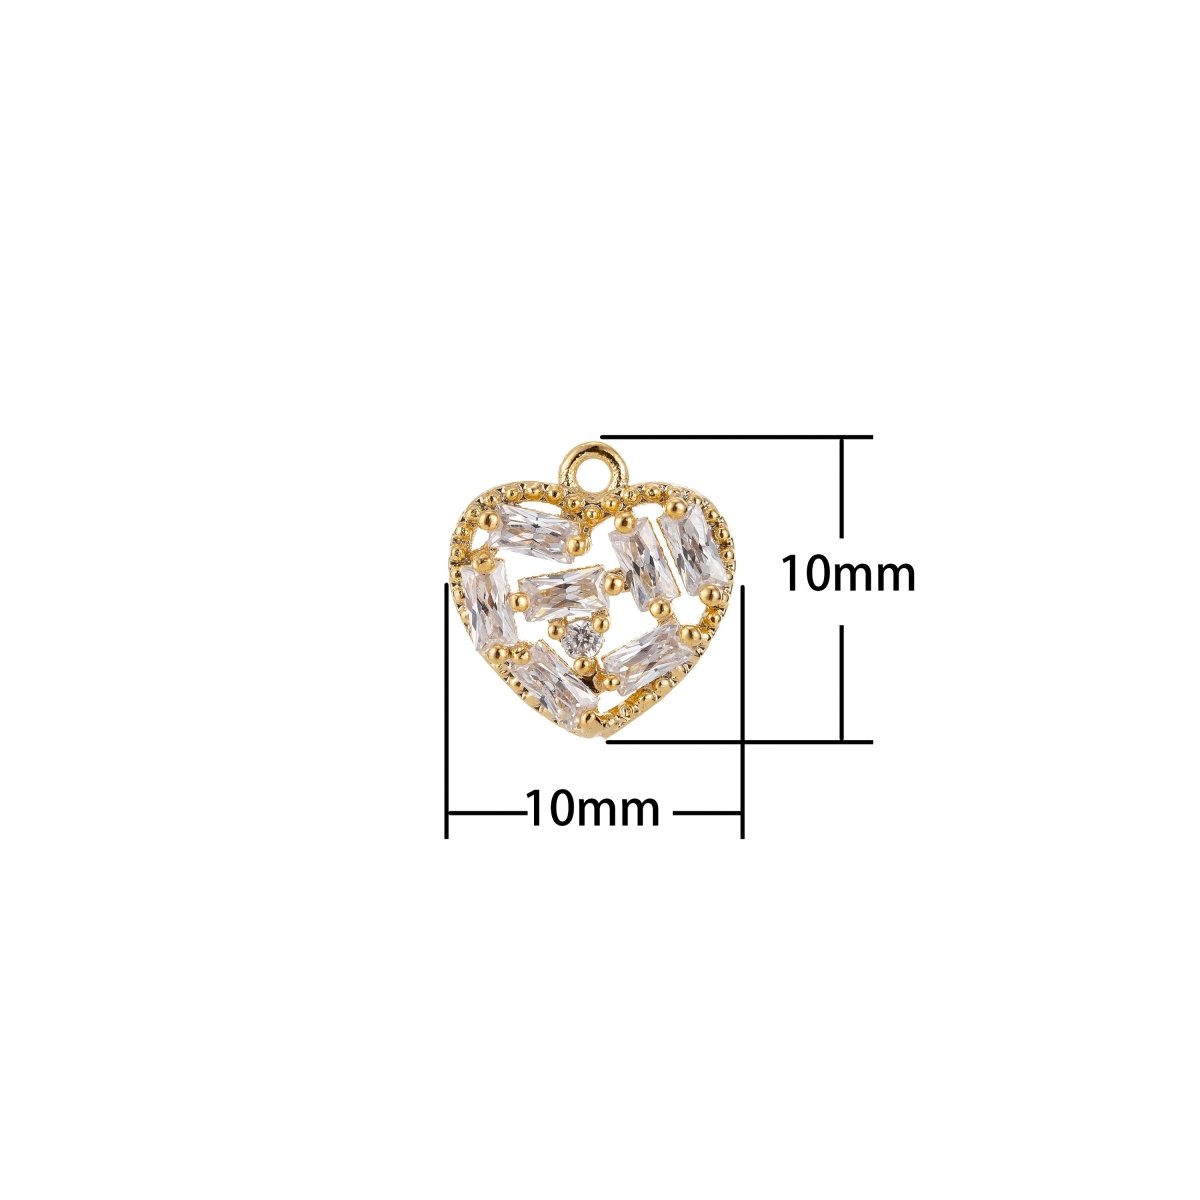 Dainty 18k Gold Filled Heart Charm Dangling Pendant w/ Cubic Zircon for Layer Necklace Earring Charm Jewelry Making E-462 - DLUXCA